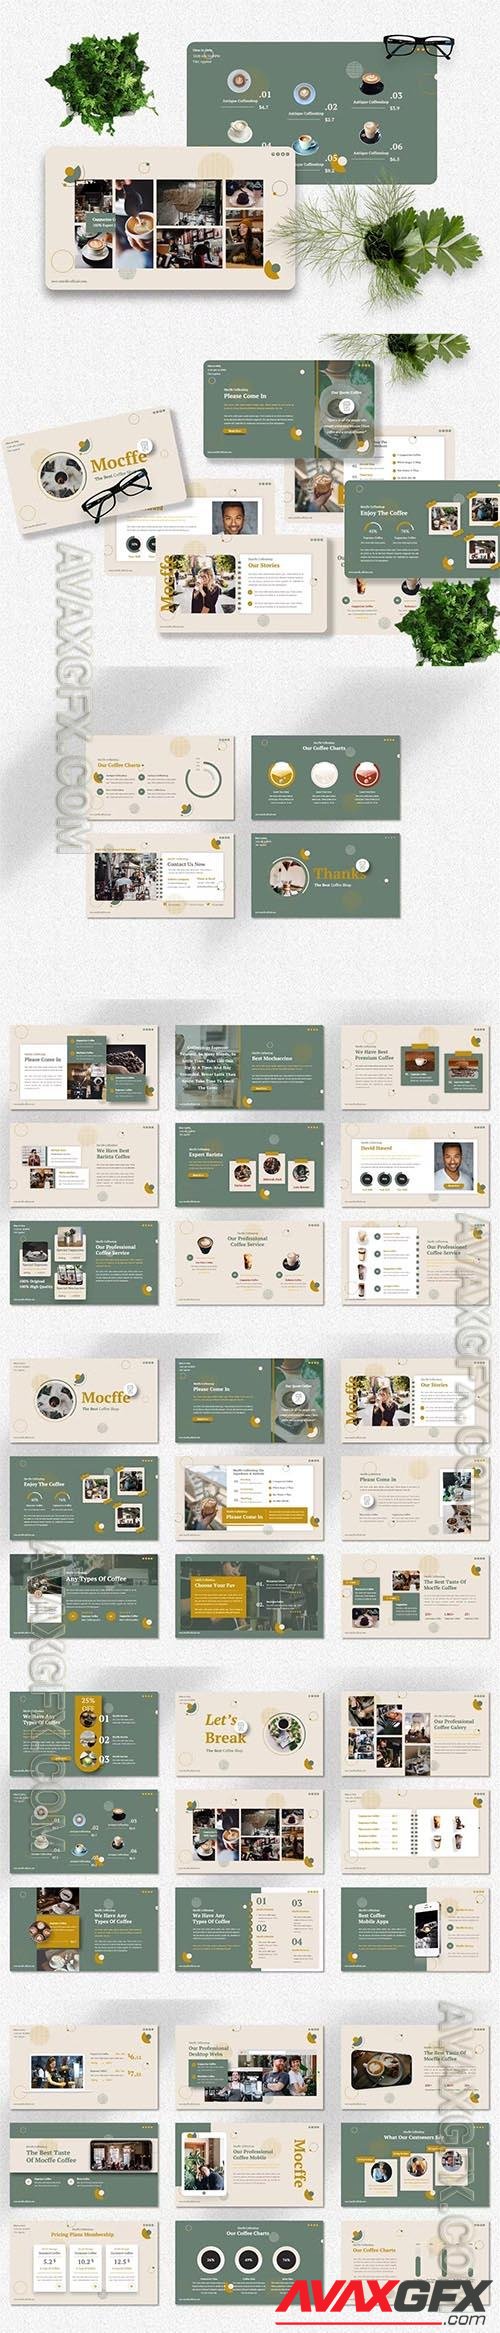 Mocffe - Coffee Shop Powerpoint, Keynote and Google Slides Templates